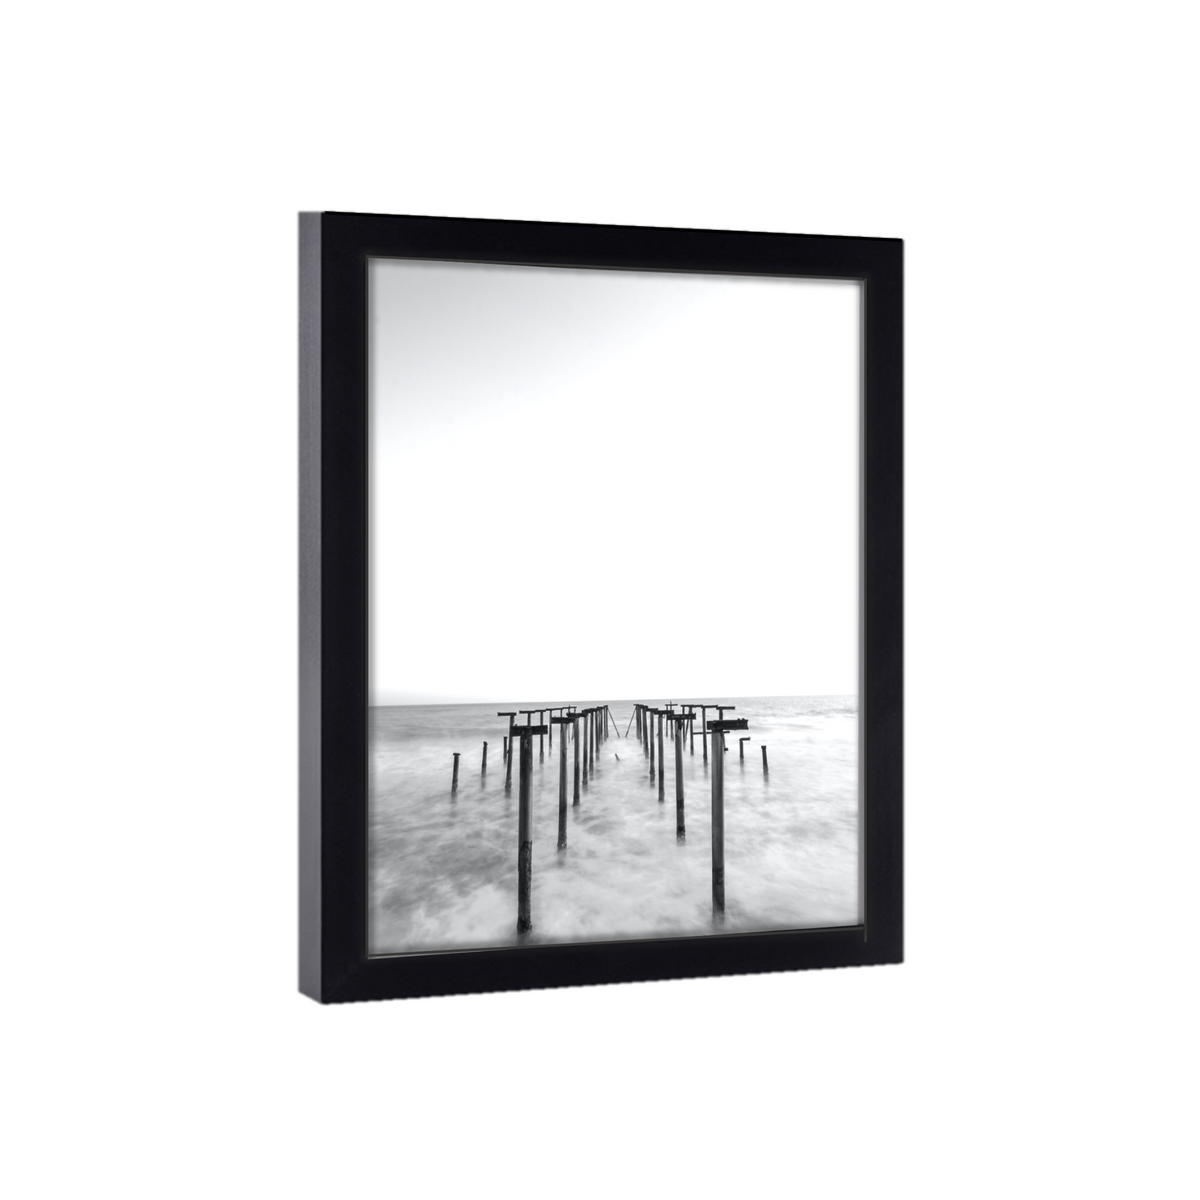 Gallery Wall 8x8 Picture Frame Wood Black 8x8 Frame Black